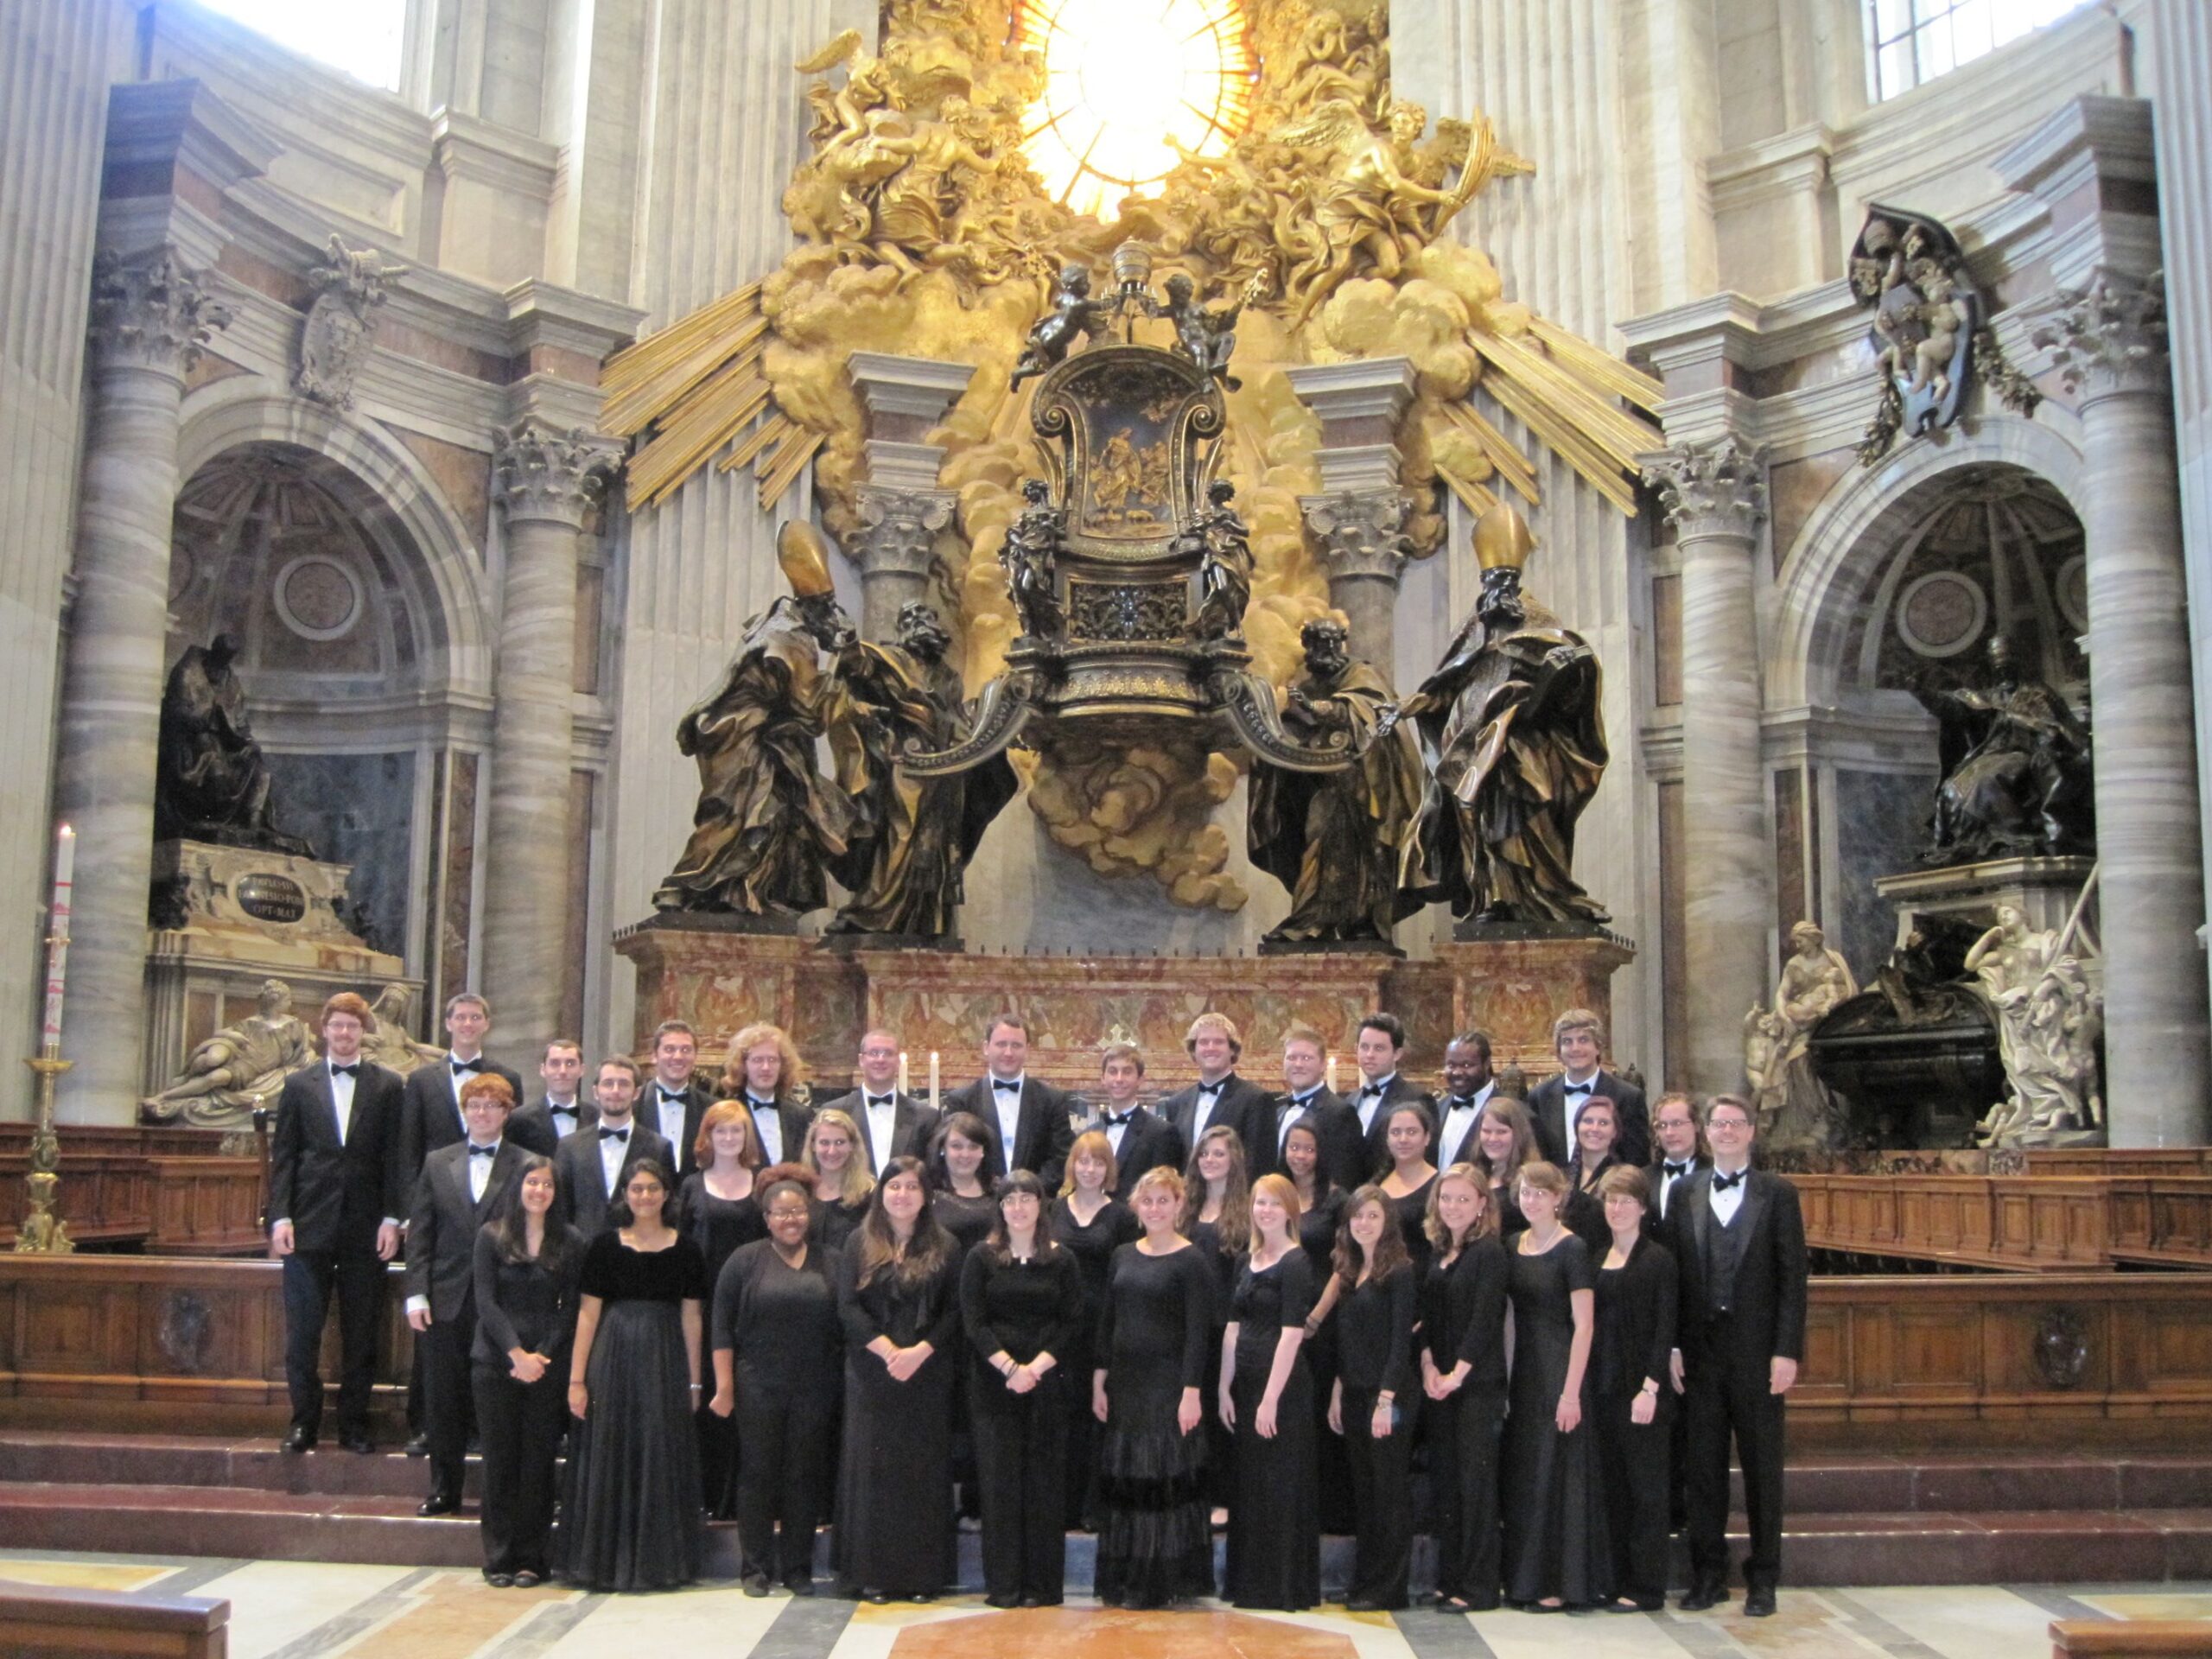 Choir posing for a photo at St. Peter’s Basilica 